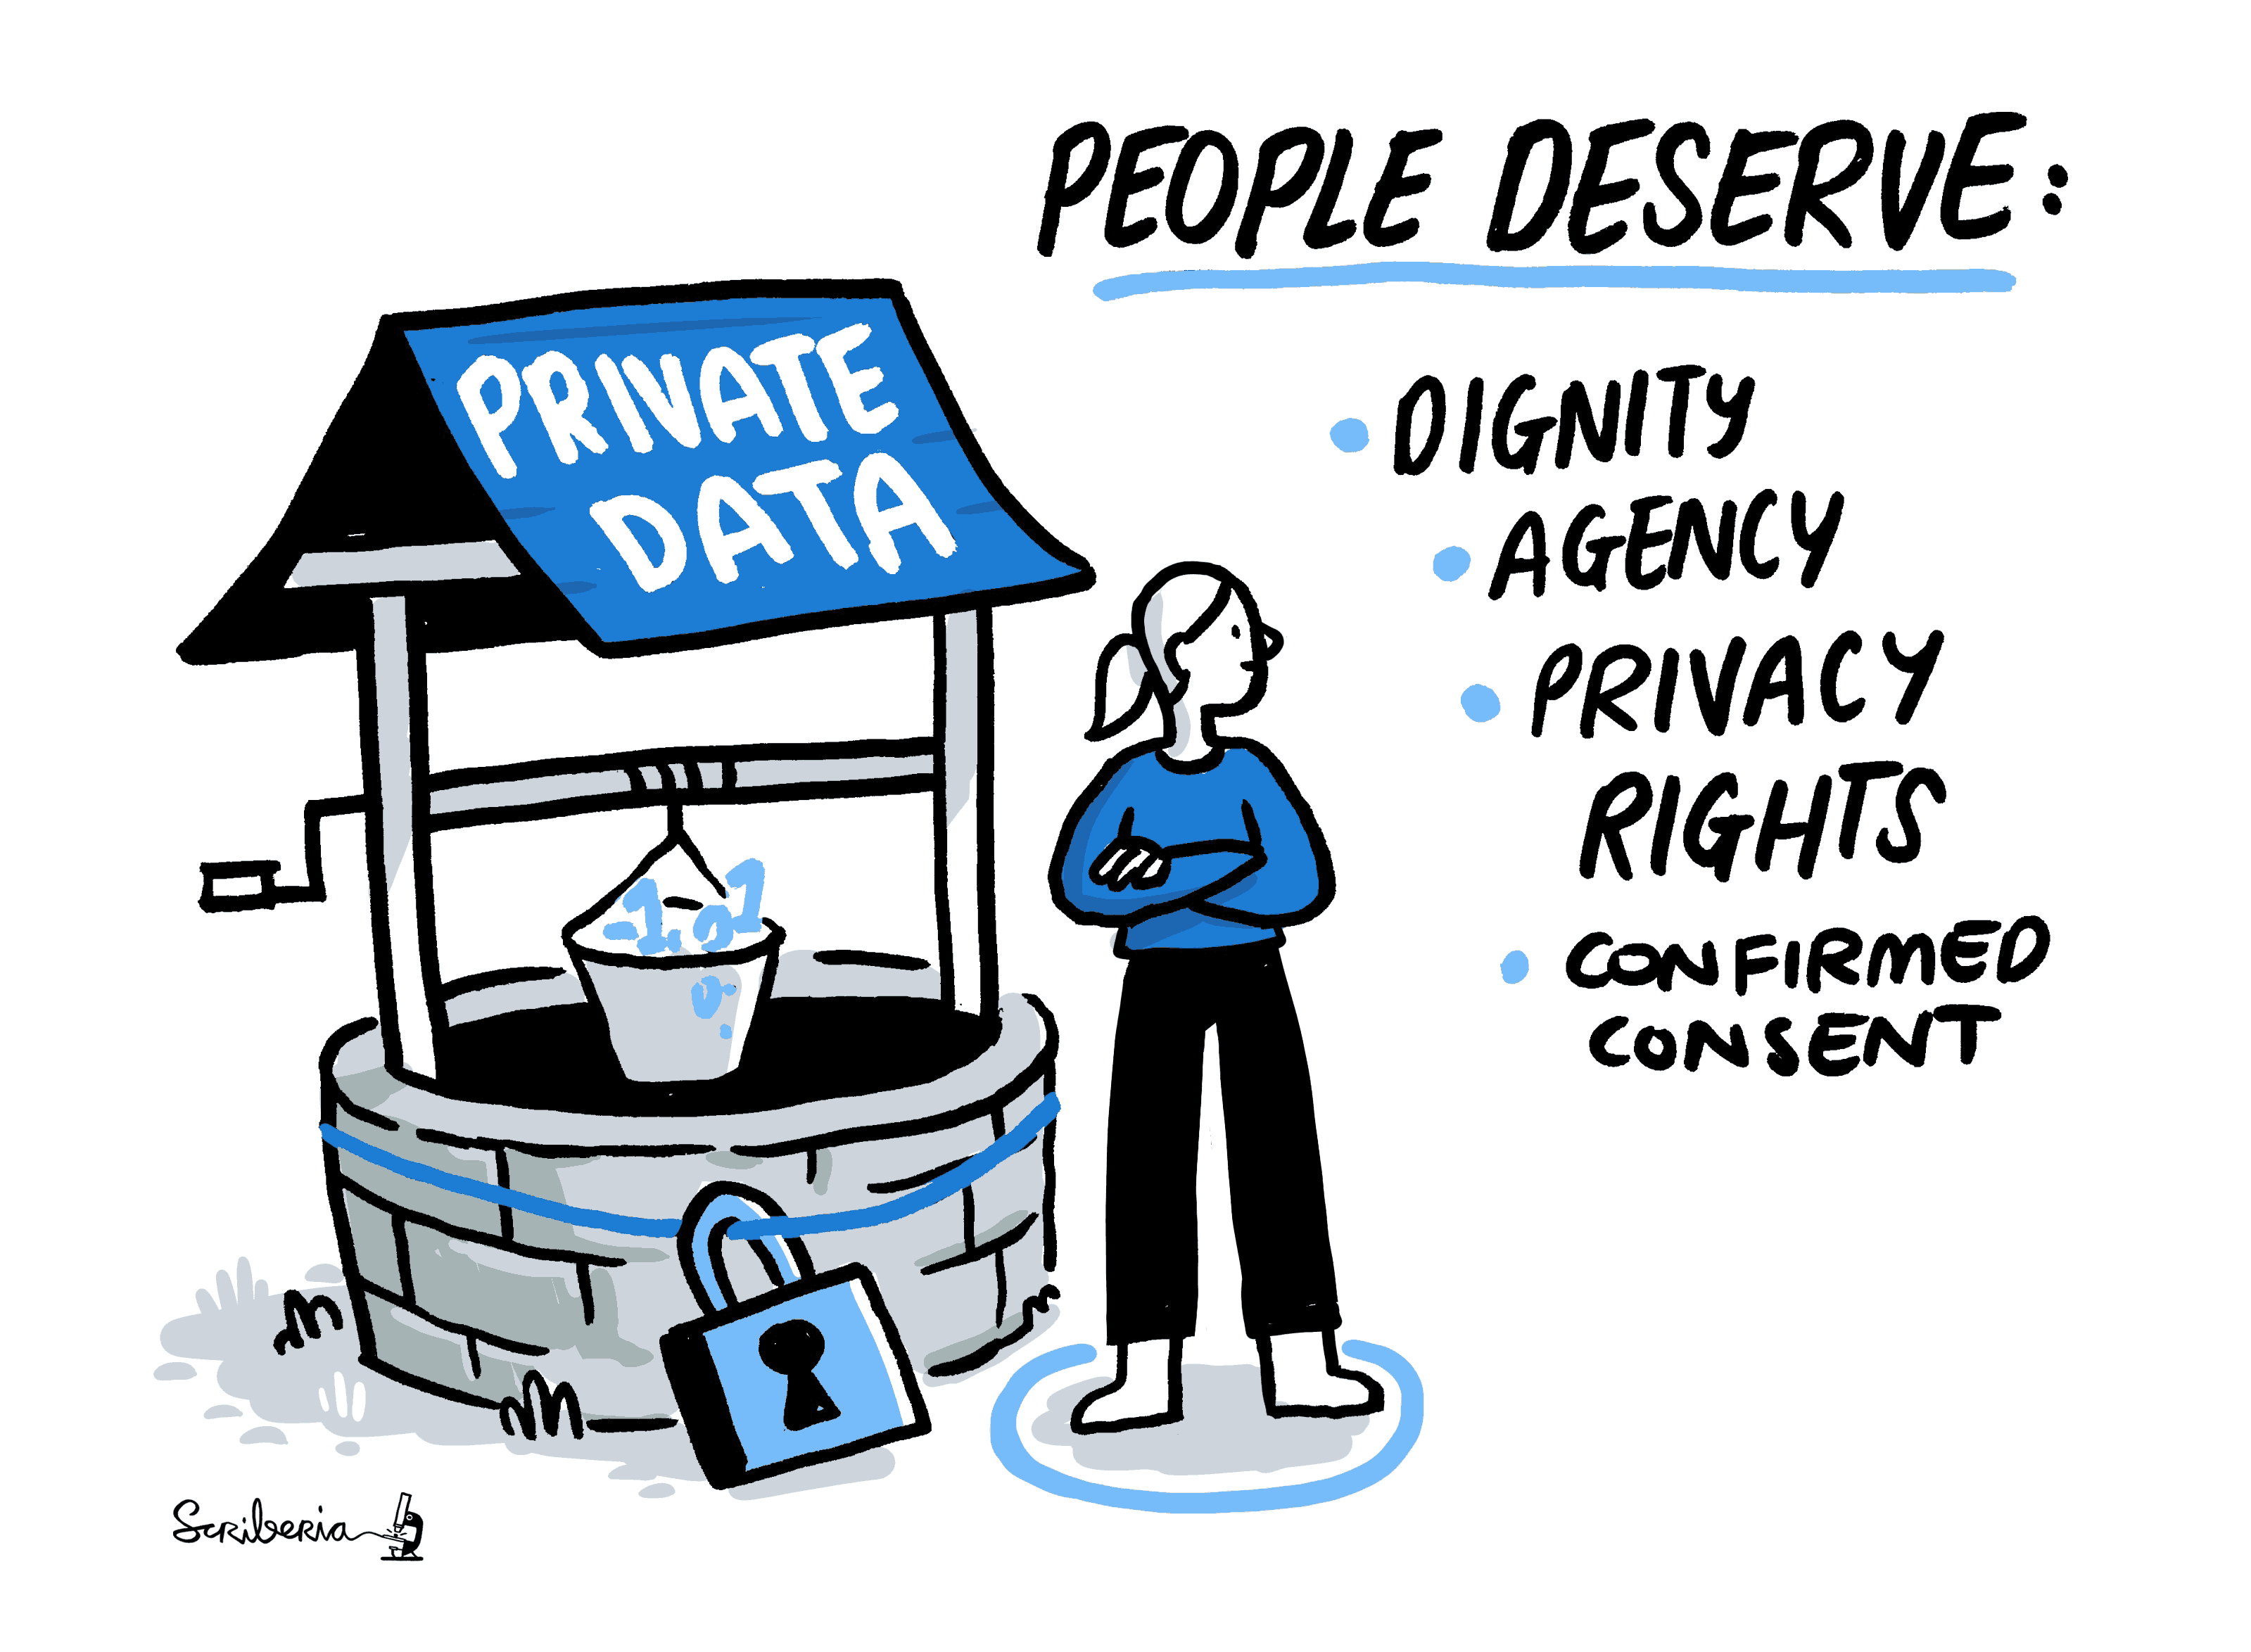 An image detailing why private data should be used. A person stands next to a well with 'private data' written on it and a padlock around it. It is black and white and blue. The text lists that 'people deserve - dignity, agency, privacy, rights, confirmed consent.'